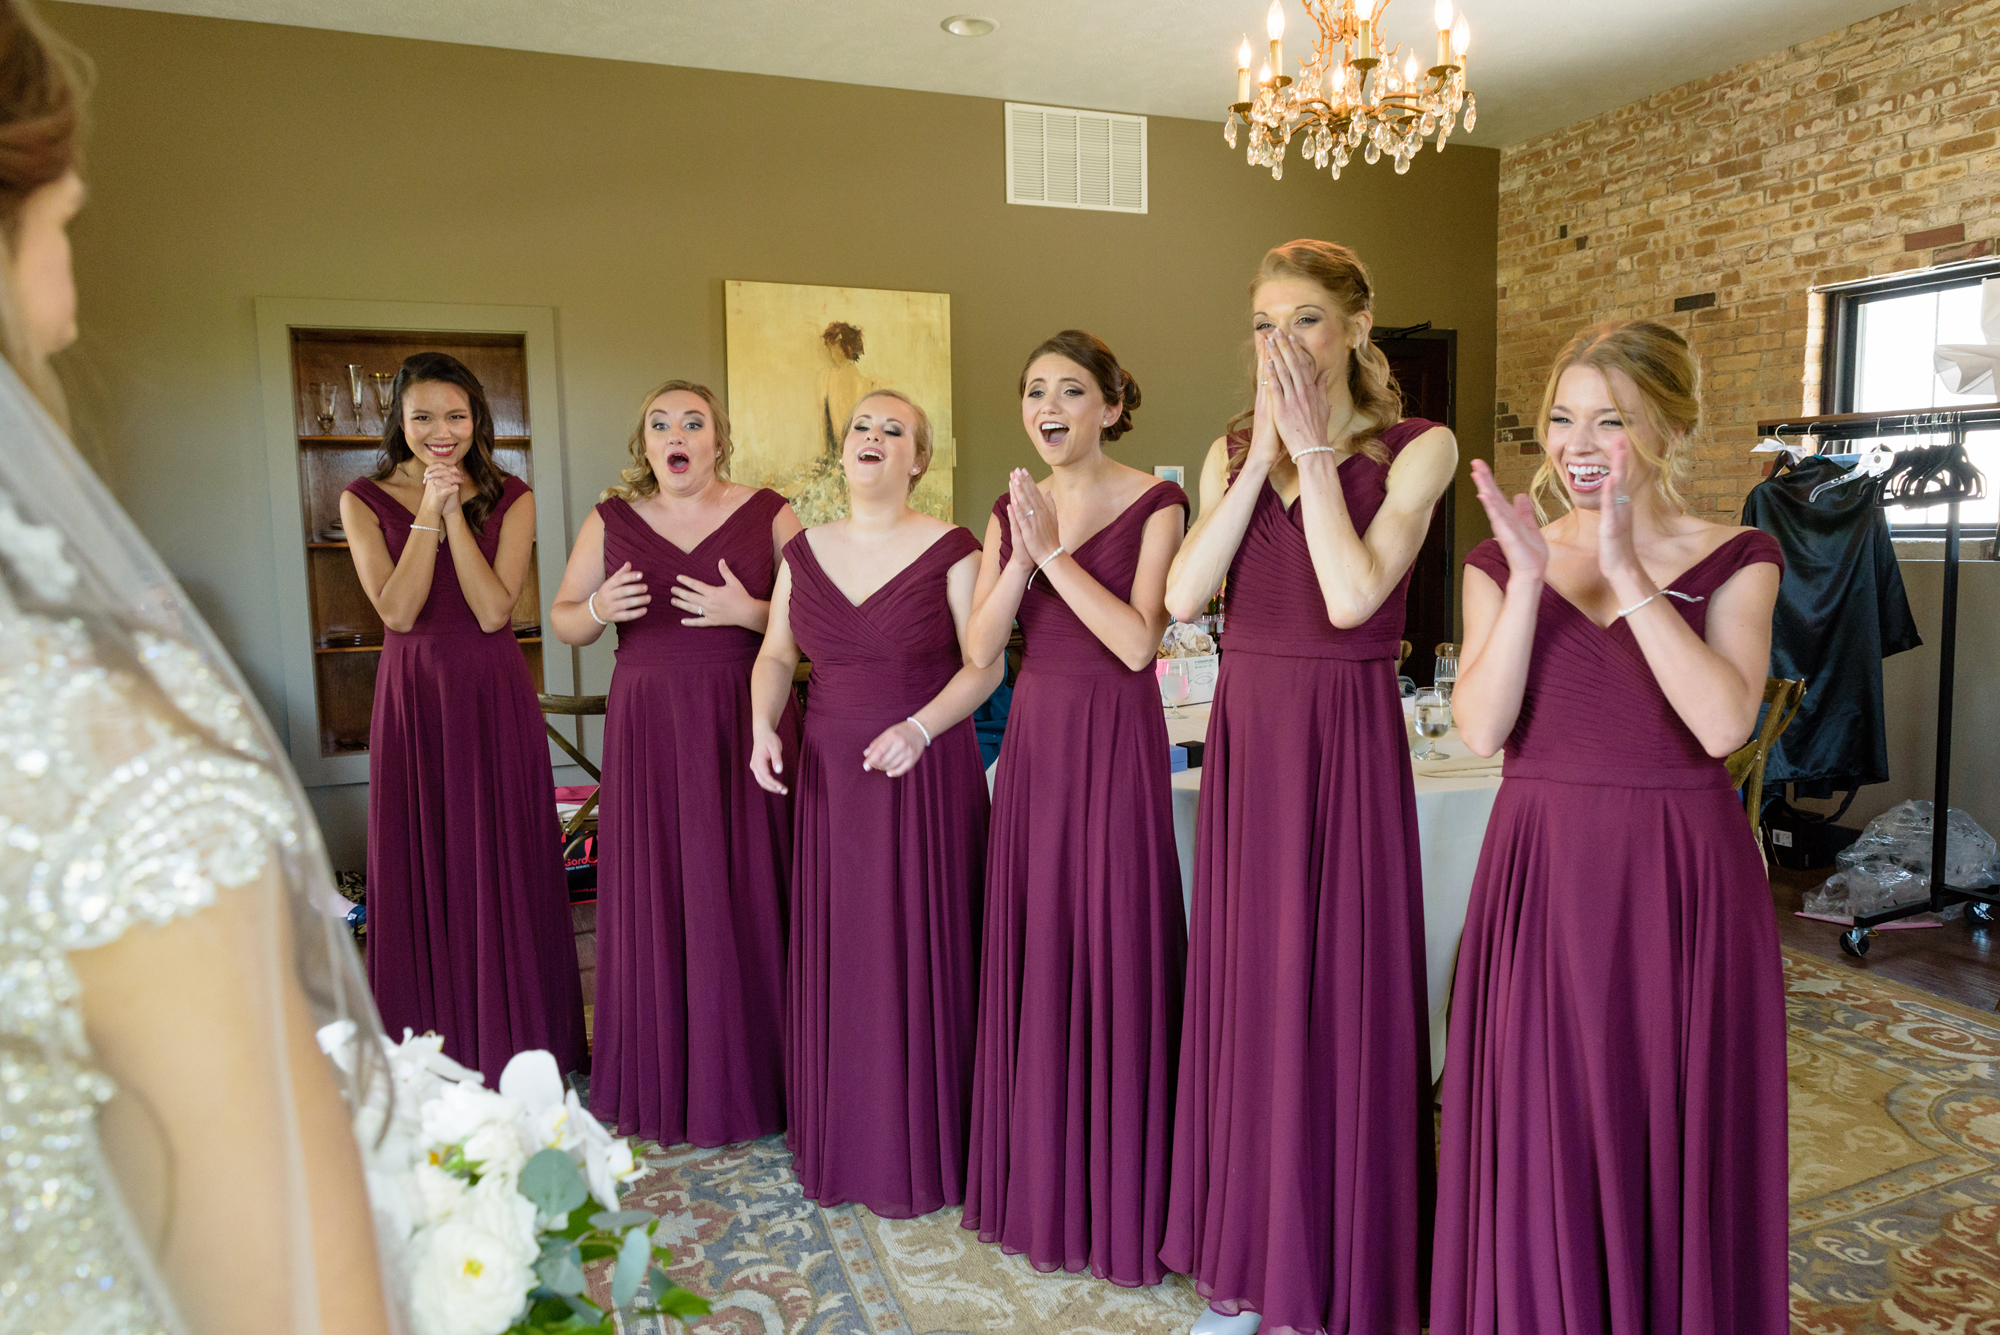 Bridesmaid reveal before a wedding ceremony at the Armory